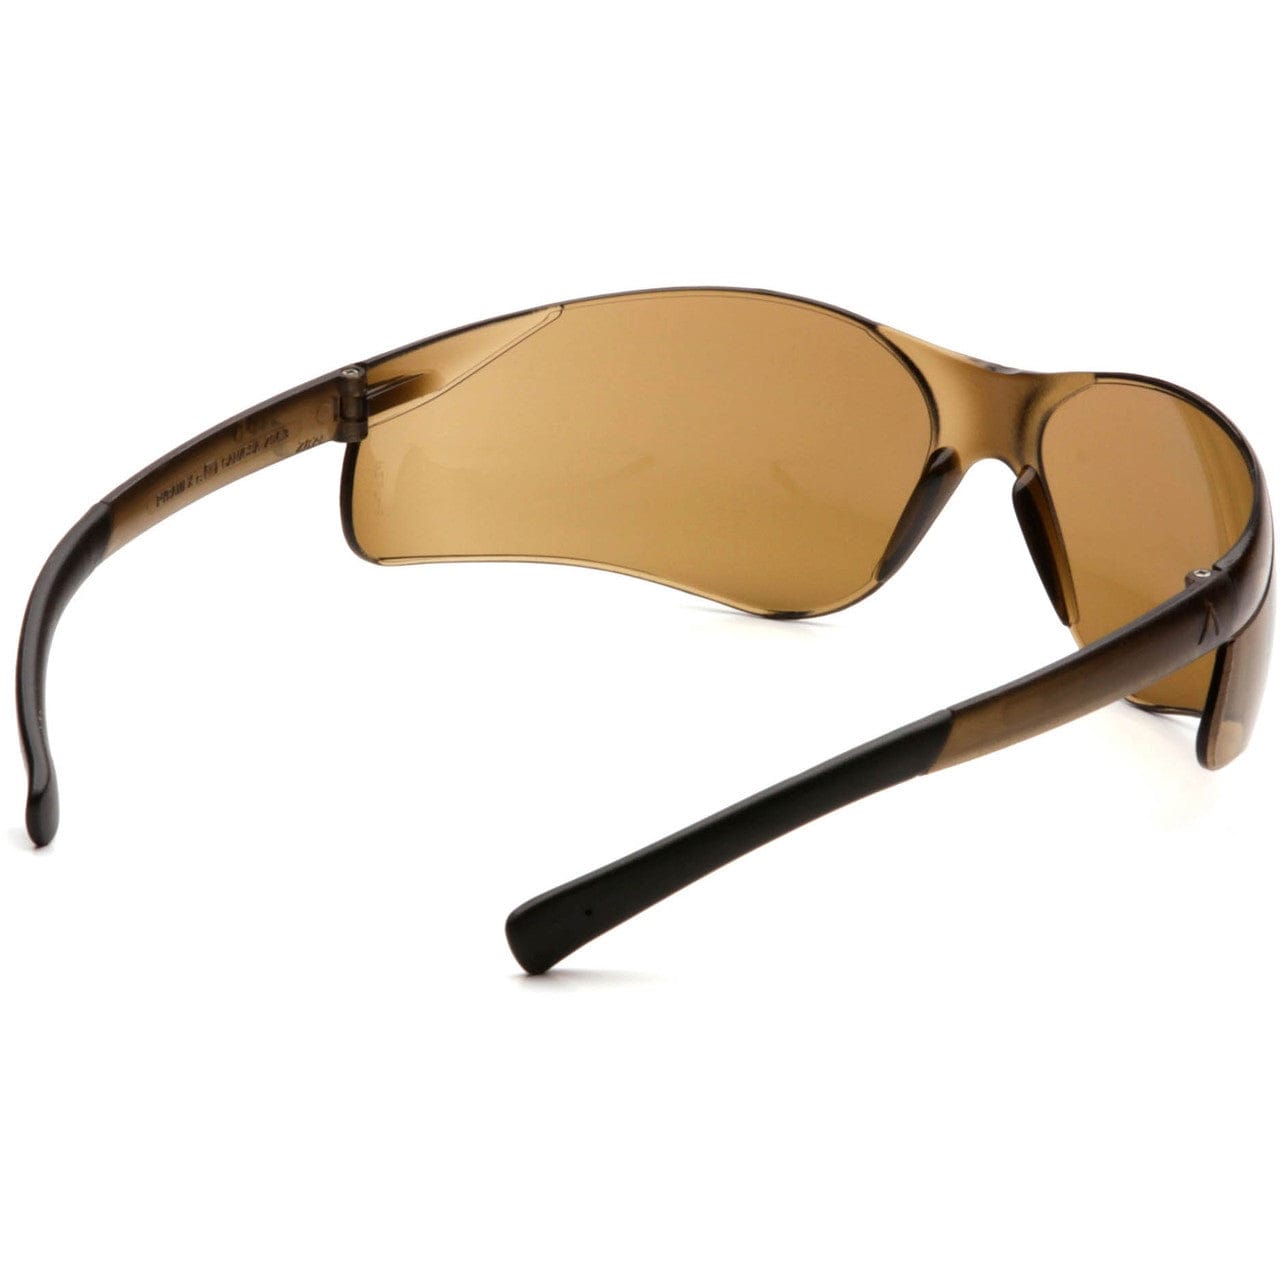 Pyramex Ztek Safety Glasses with Coffee Lens S2515S Inside View